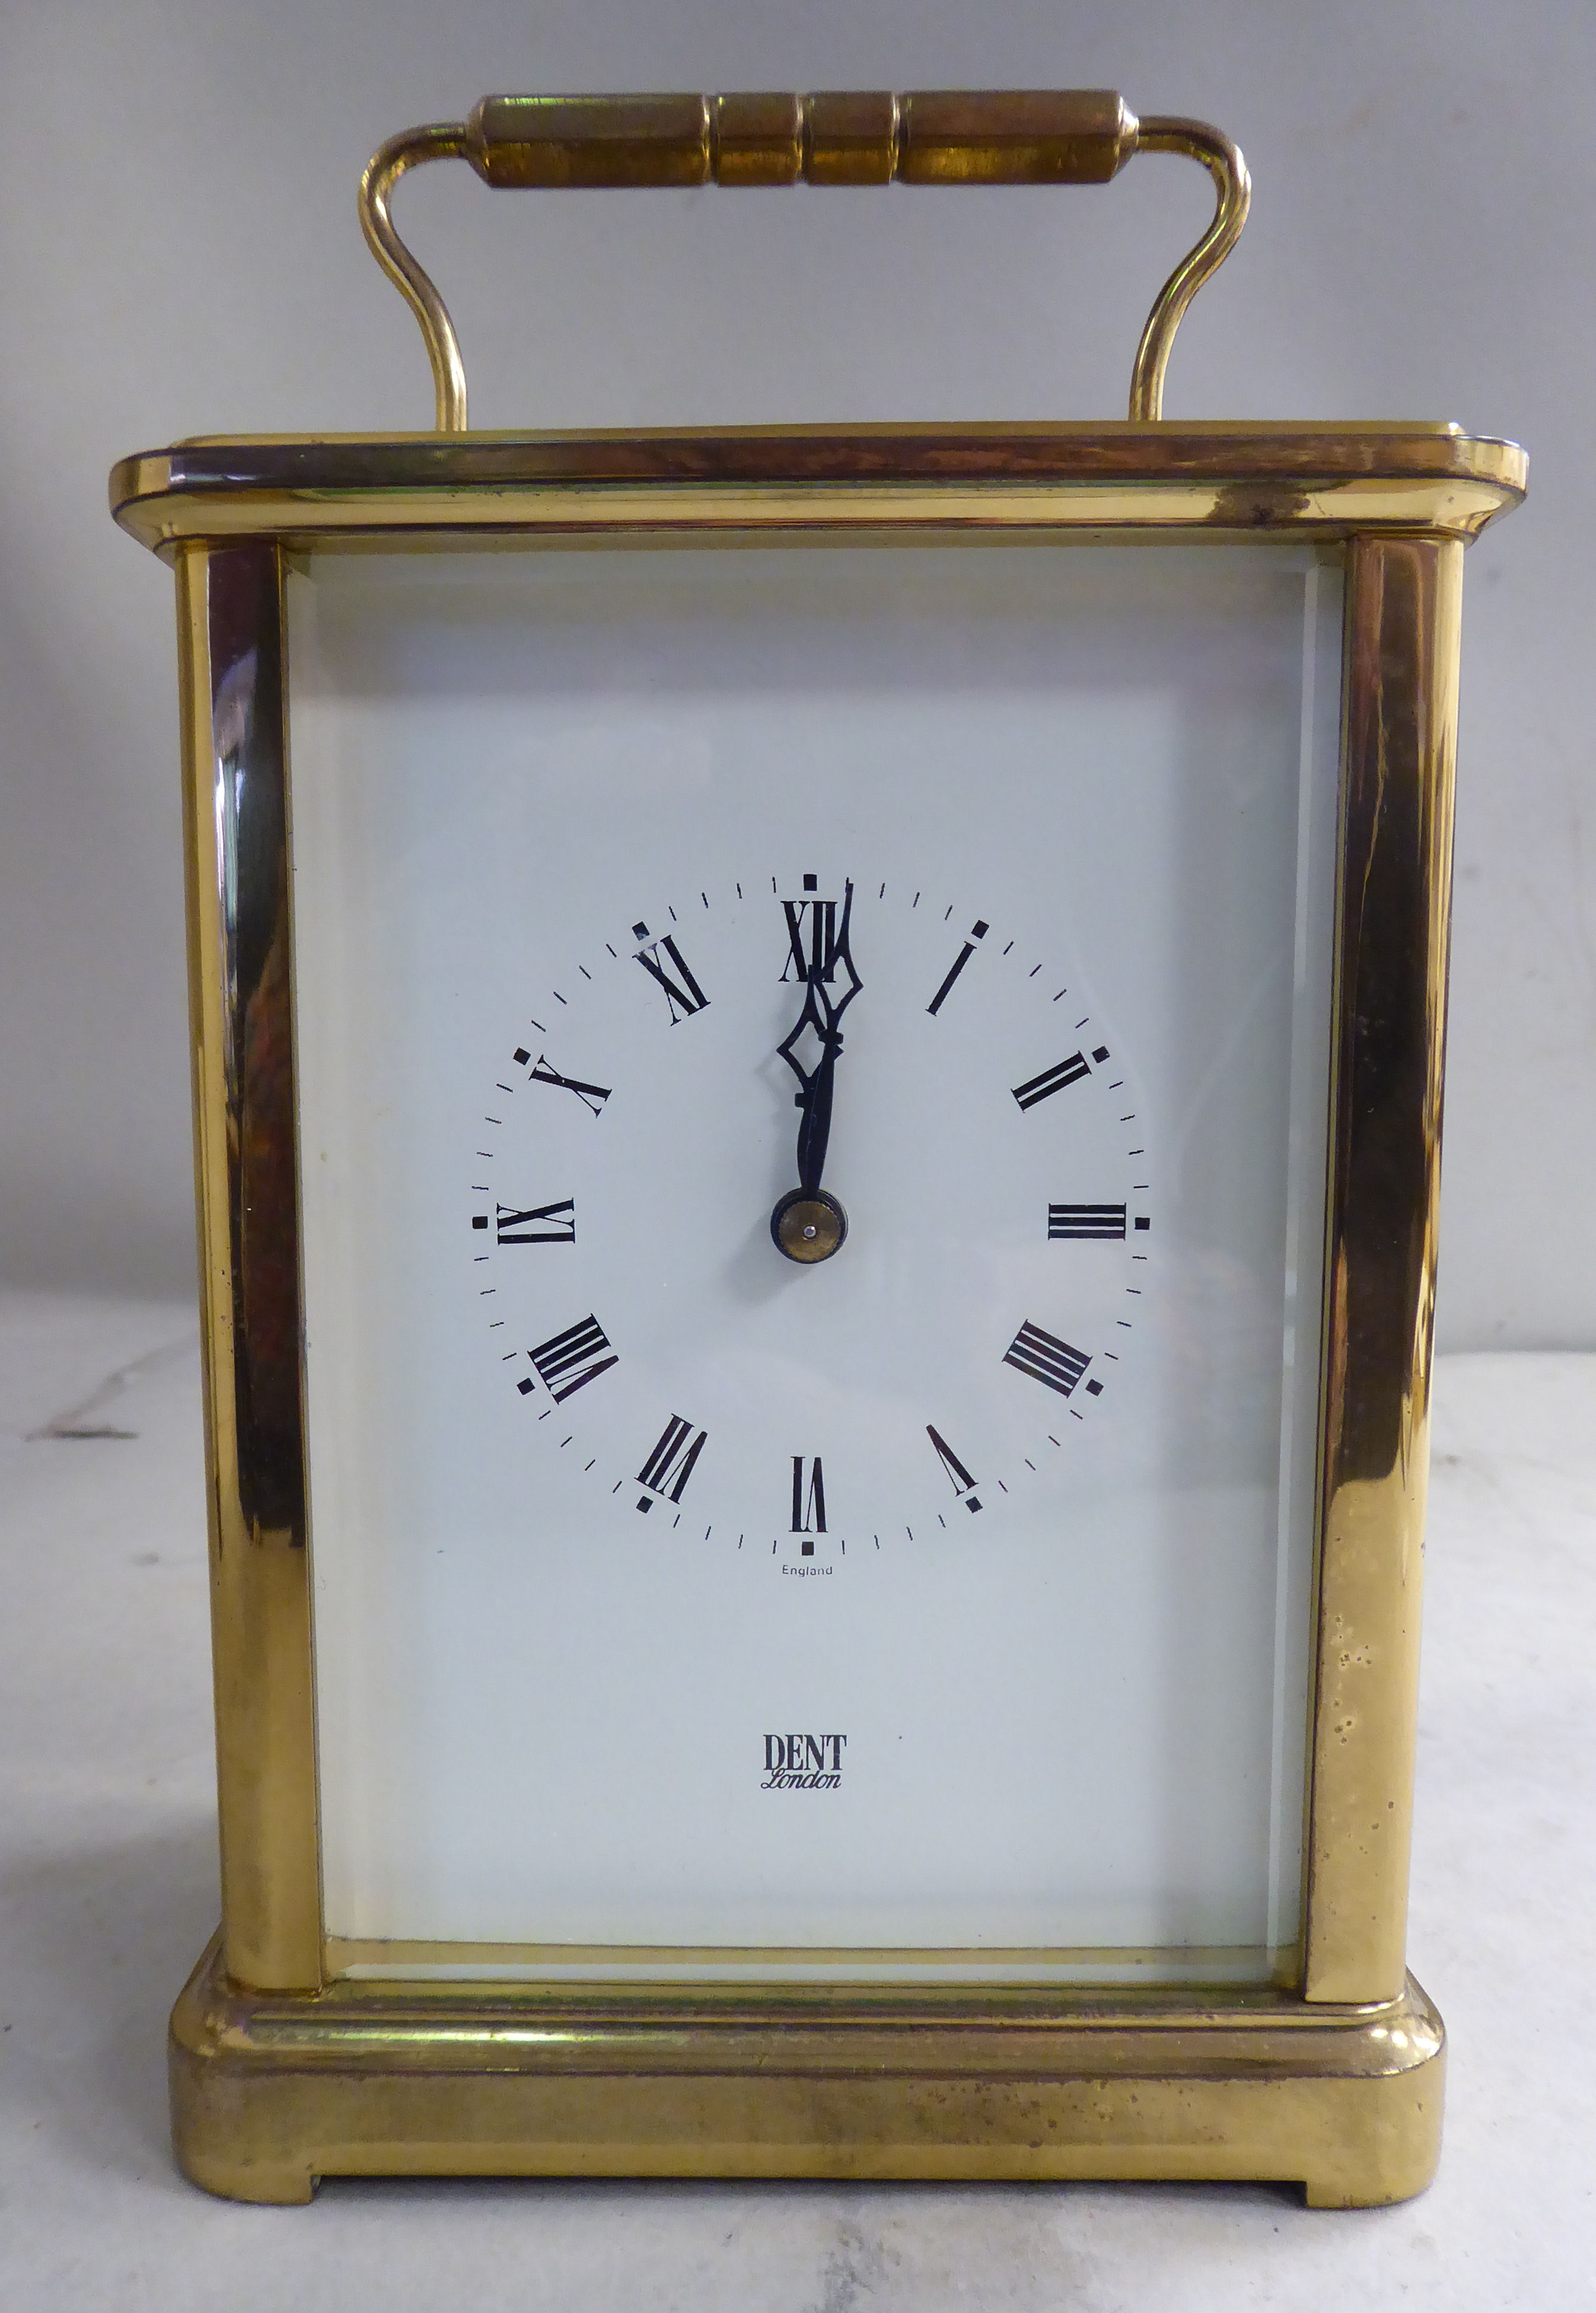 A mid 20thC lacquered brass cased carriage clock with bevelled glass panels and a folding top